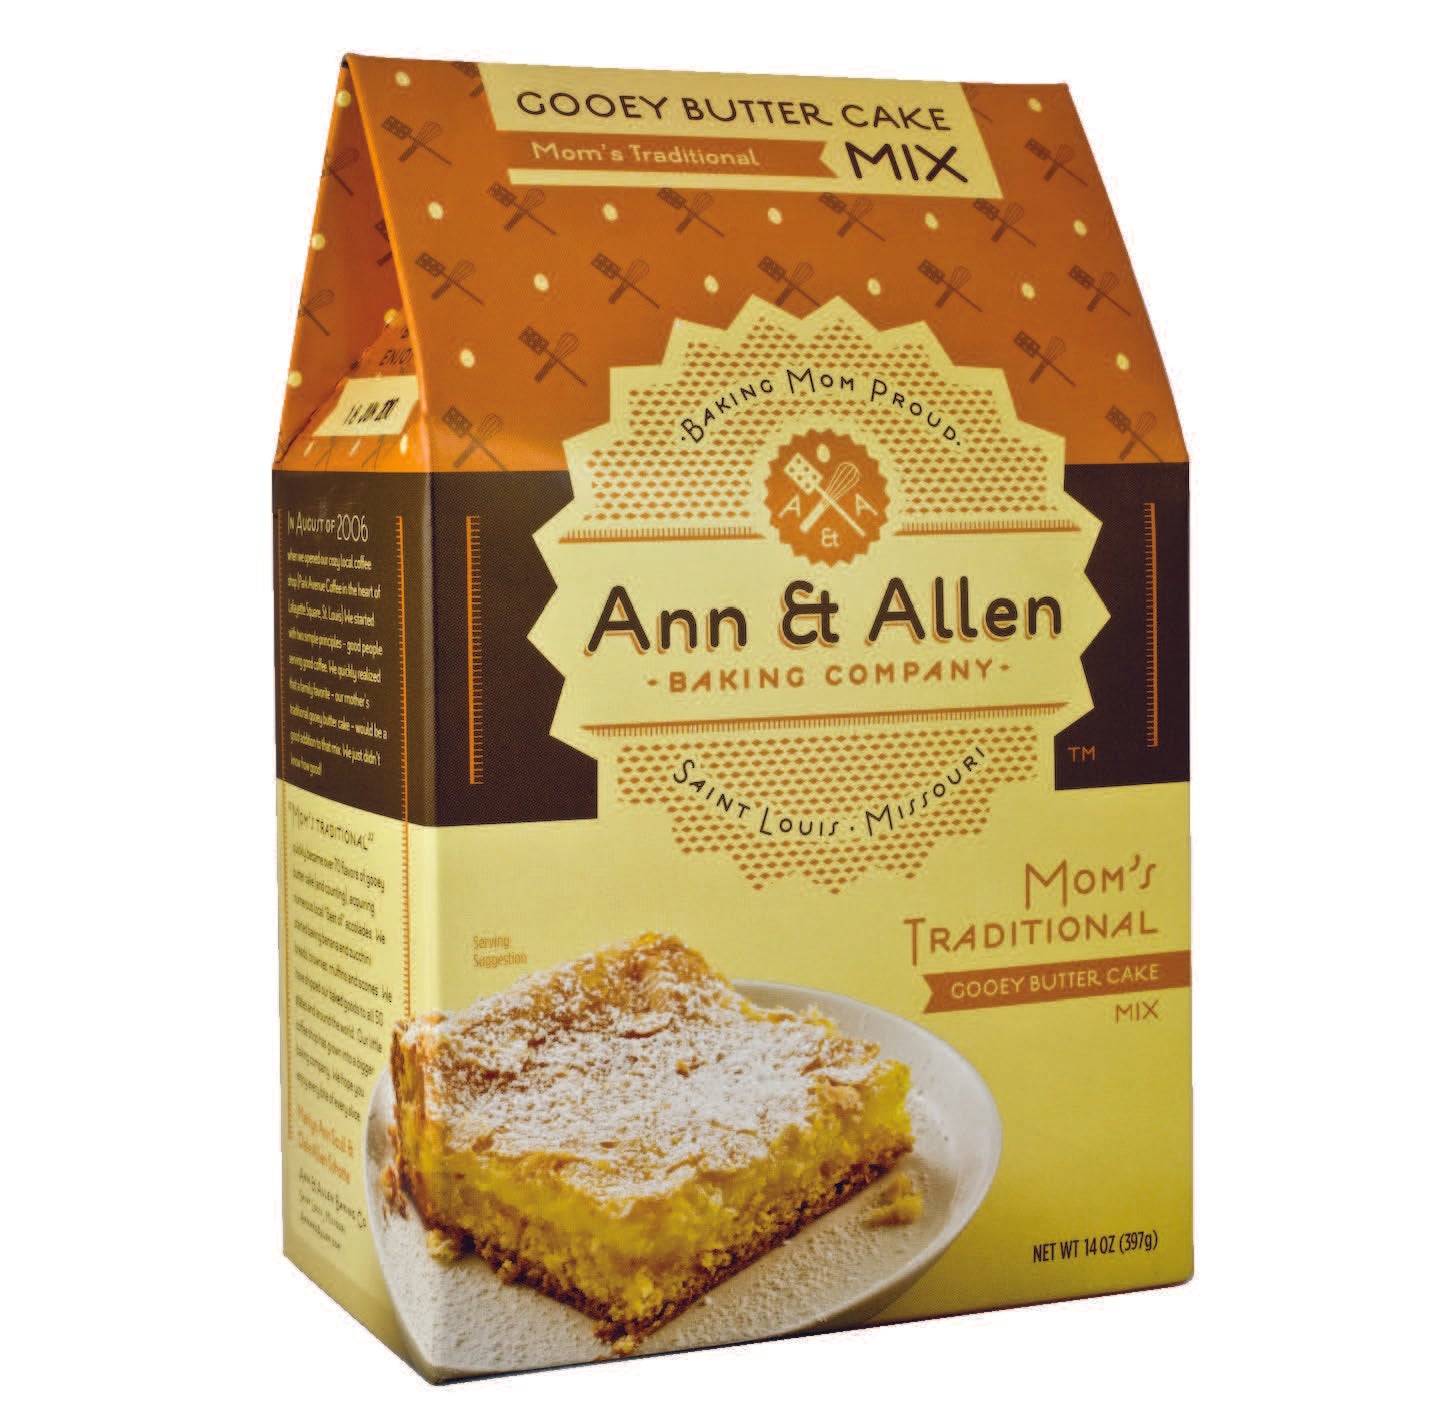 Mom's Traditional Gooey Butter Cake Mix - Park Avenue Coffee